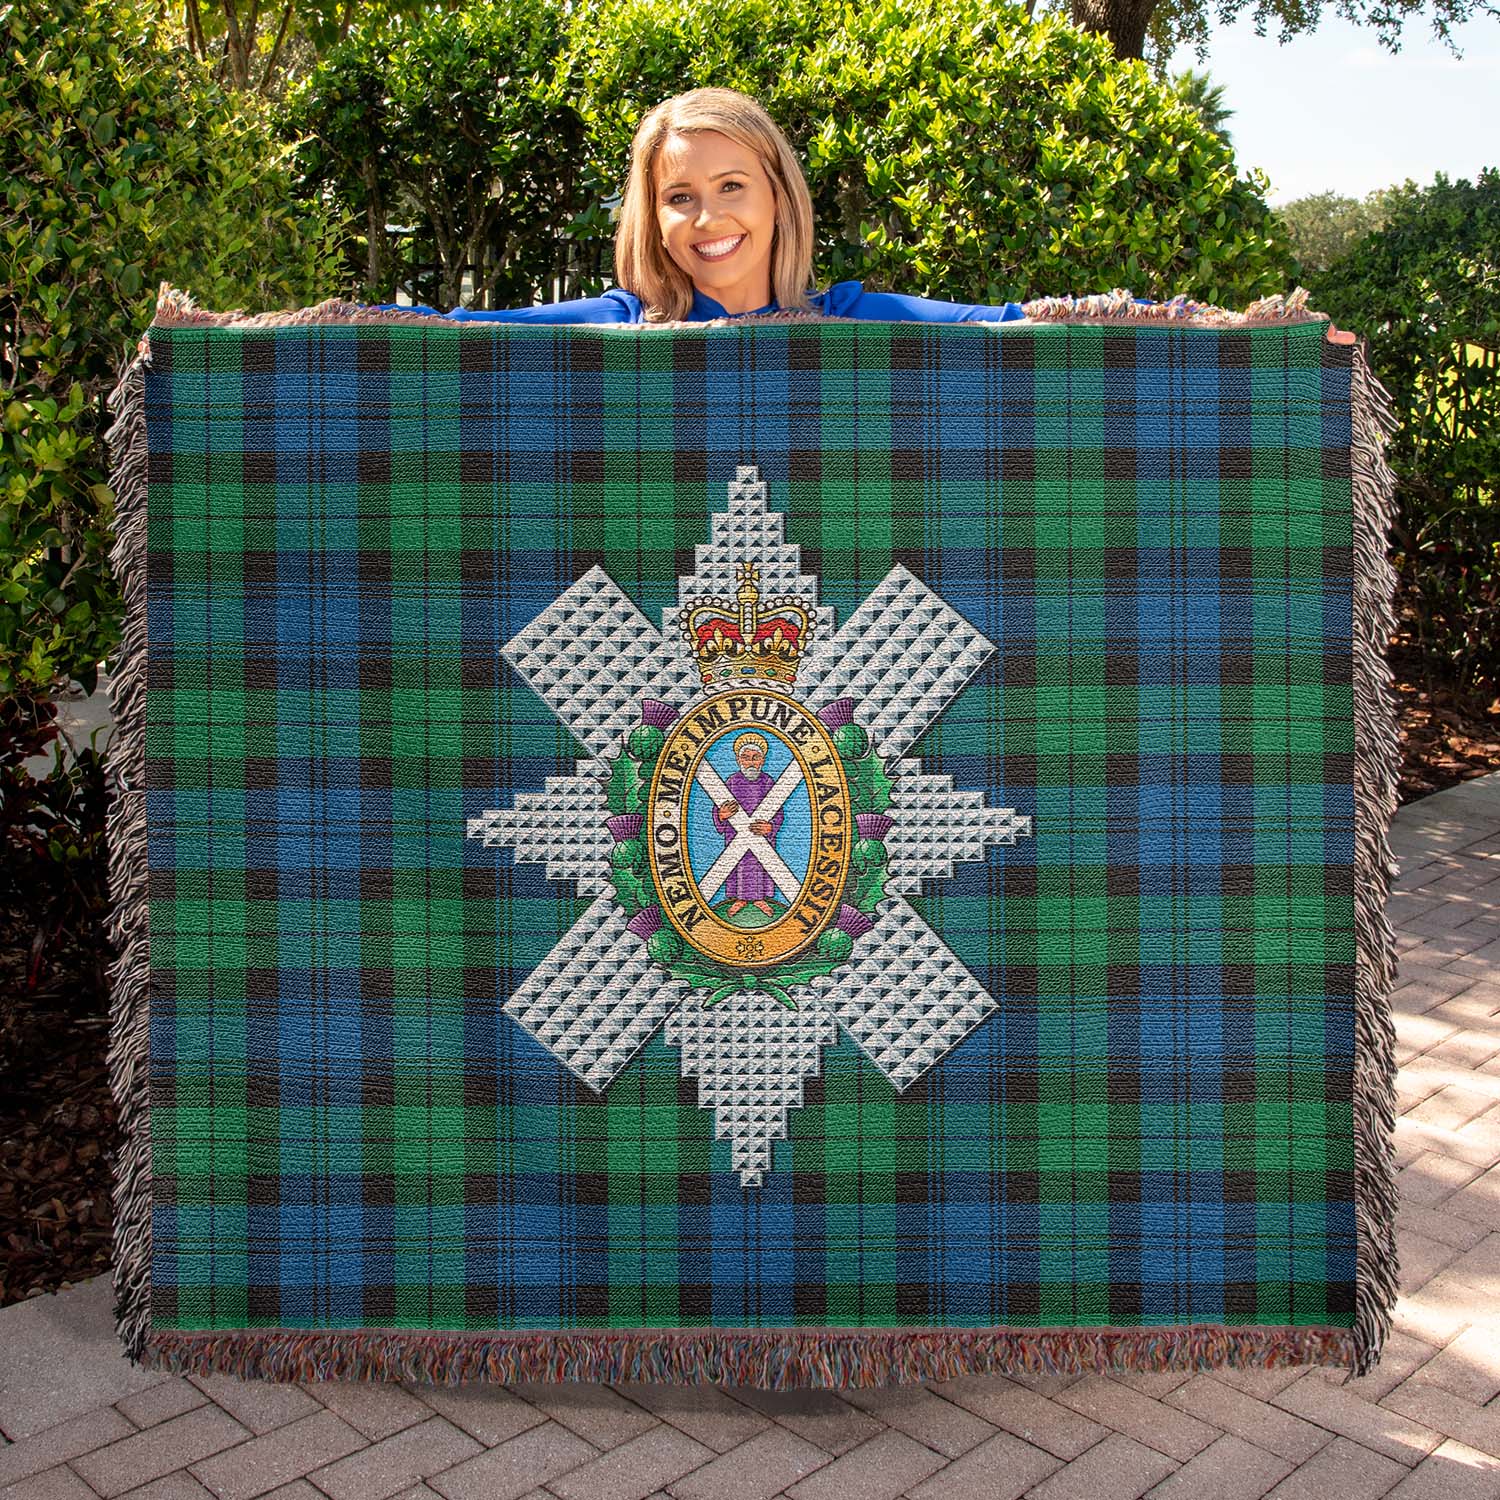 Tartan Vibes Clothing Black Watch Ancient Tartan Woven Blanket with Family Crest